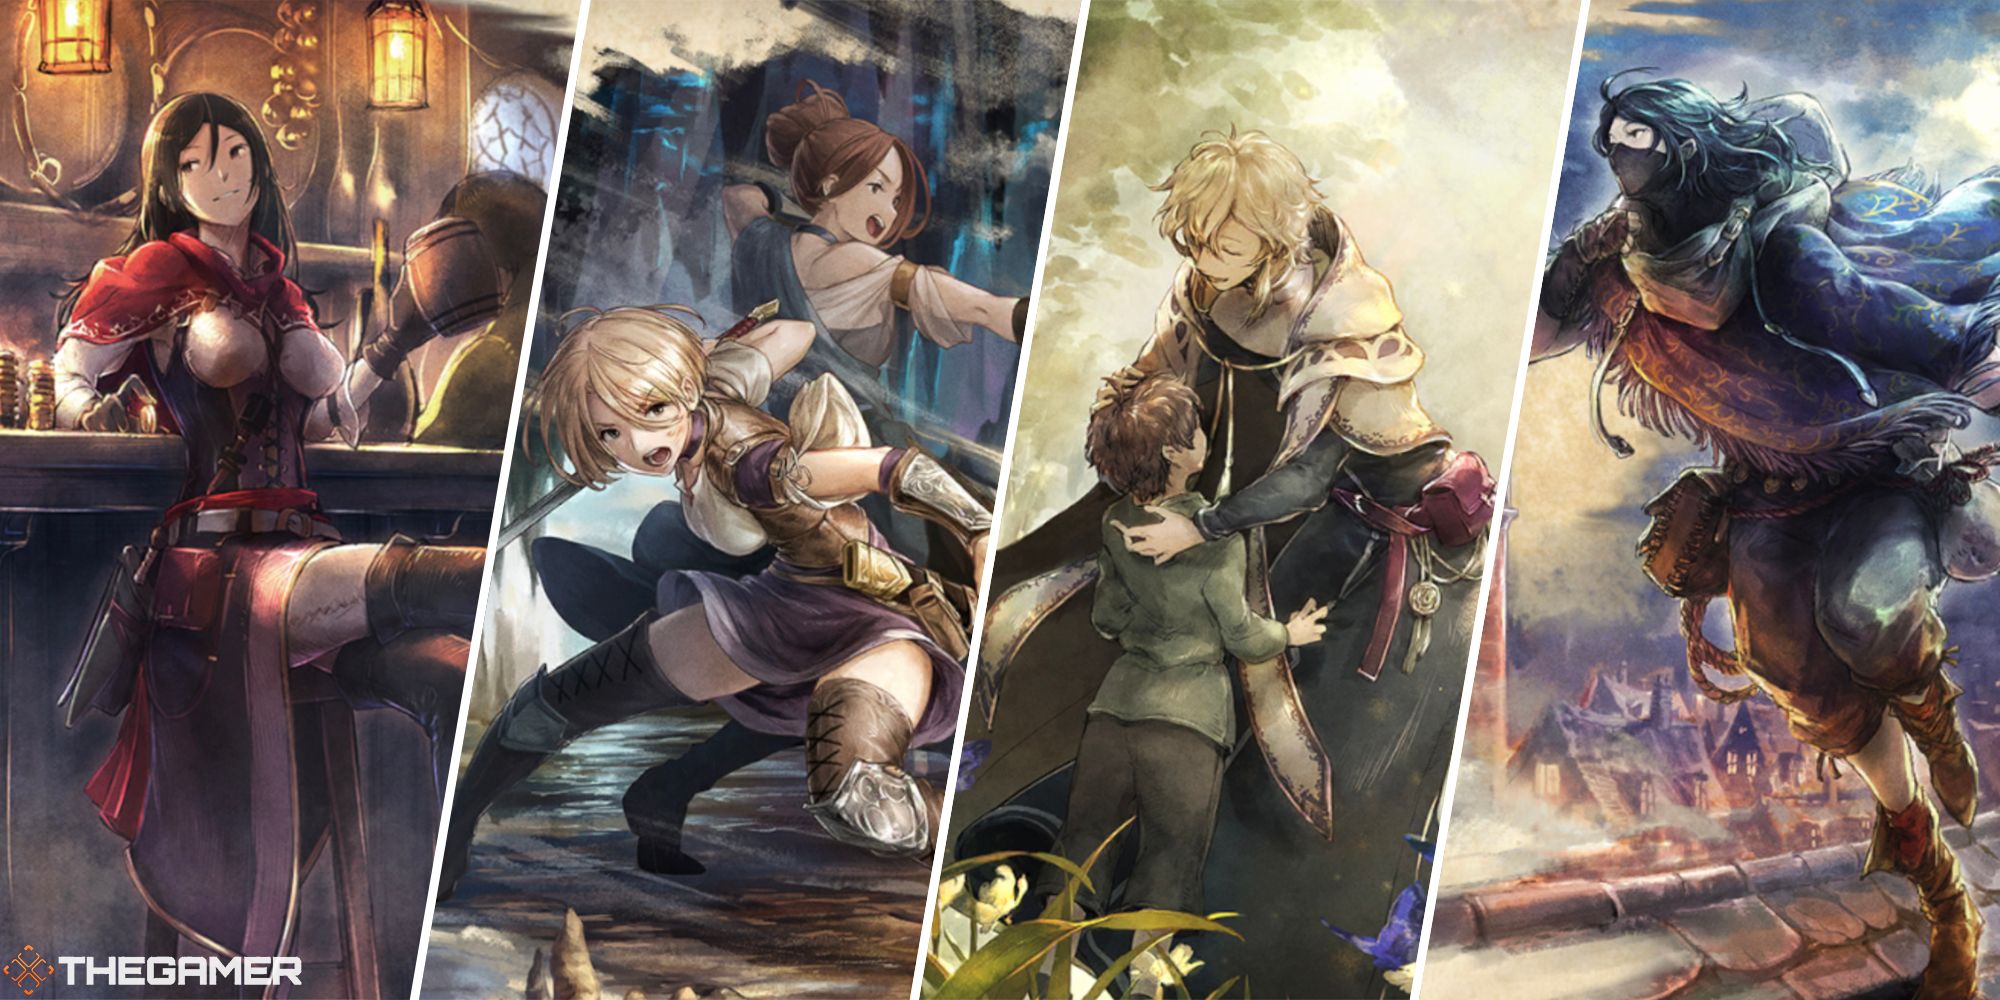 Octopath Traveler: Champions of the Continent is the laziest gacha